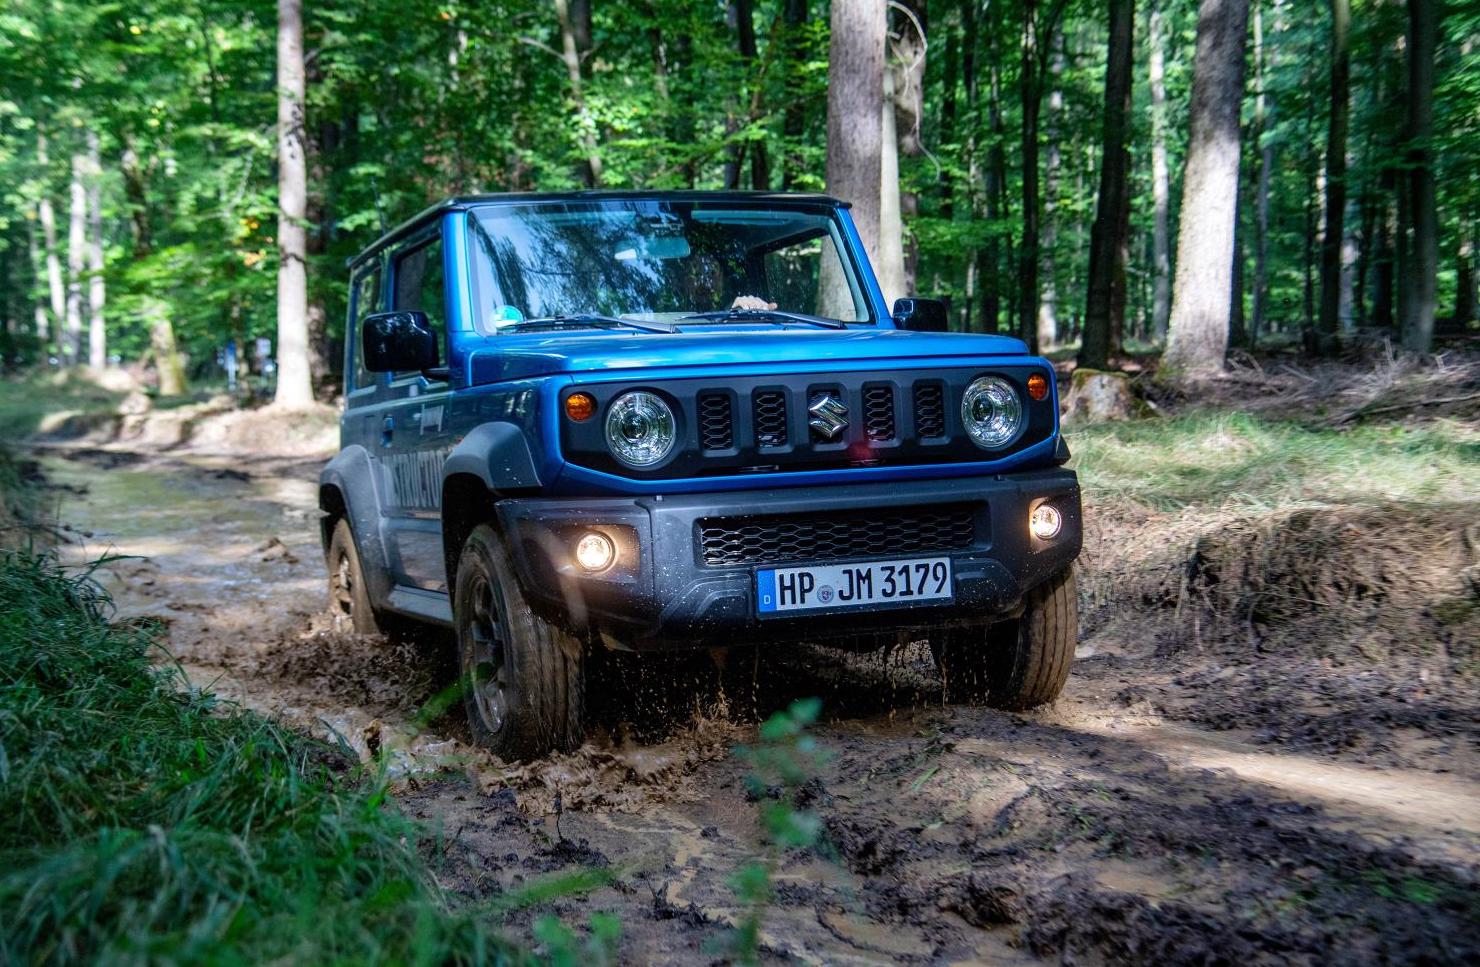 The Jimny is an affordable off-roader